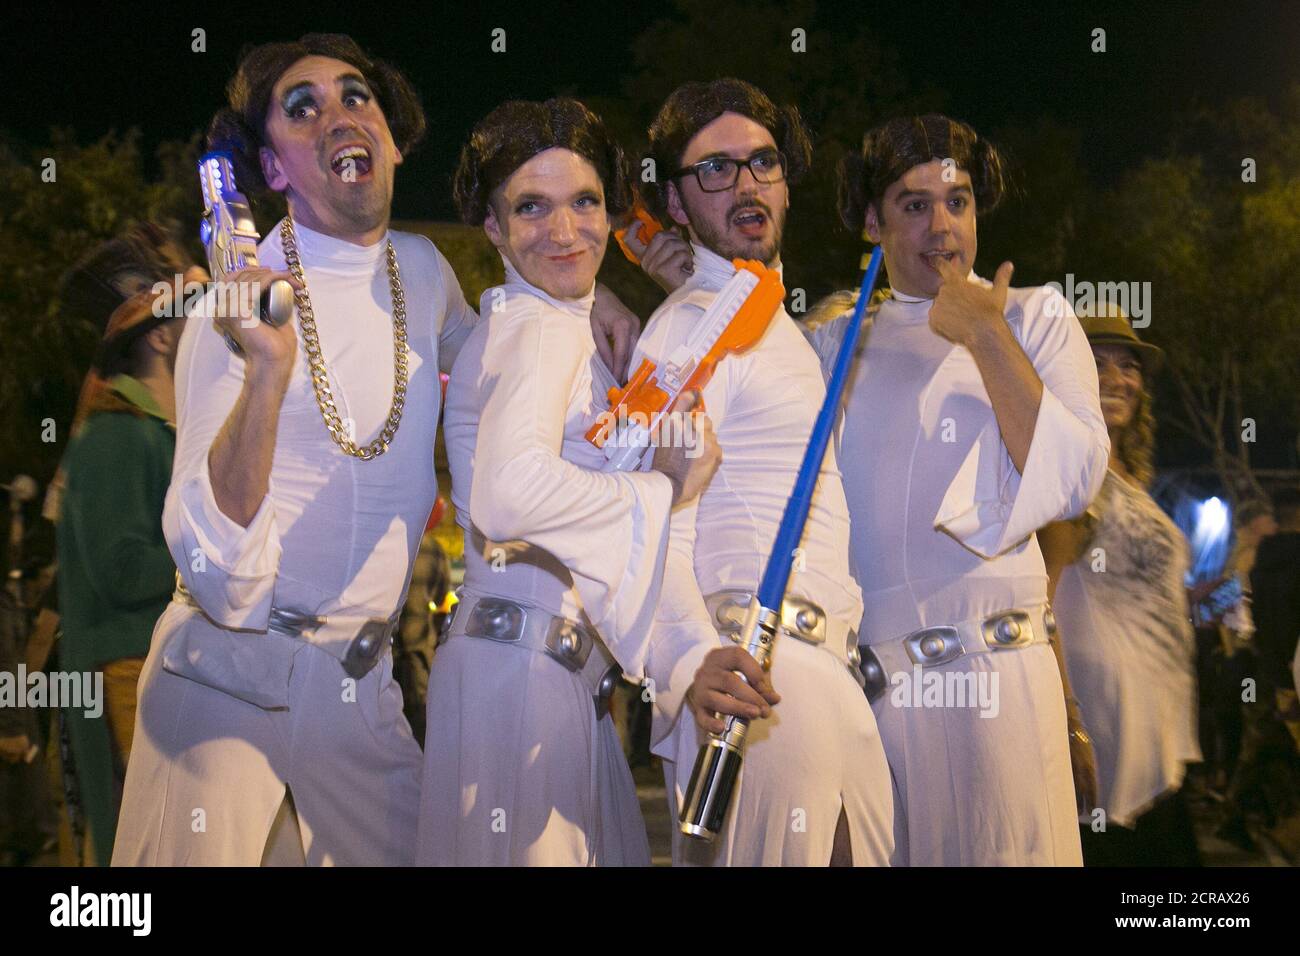 Pef Koloniaal Cursus A group of men dressed as Star Wars character Princess Leia pose at the  West Hollywood Halloween Costume Carnaval, which attracts nearly 500,000  people annually, in West Hollywood, California October 31, 2015.